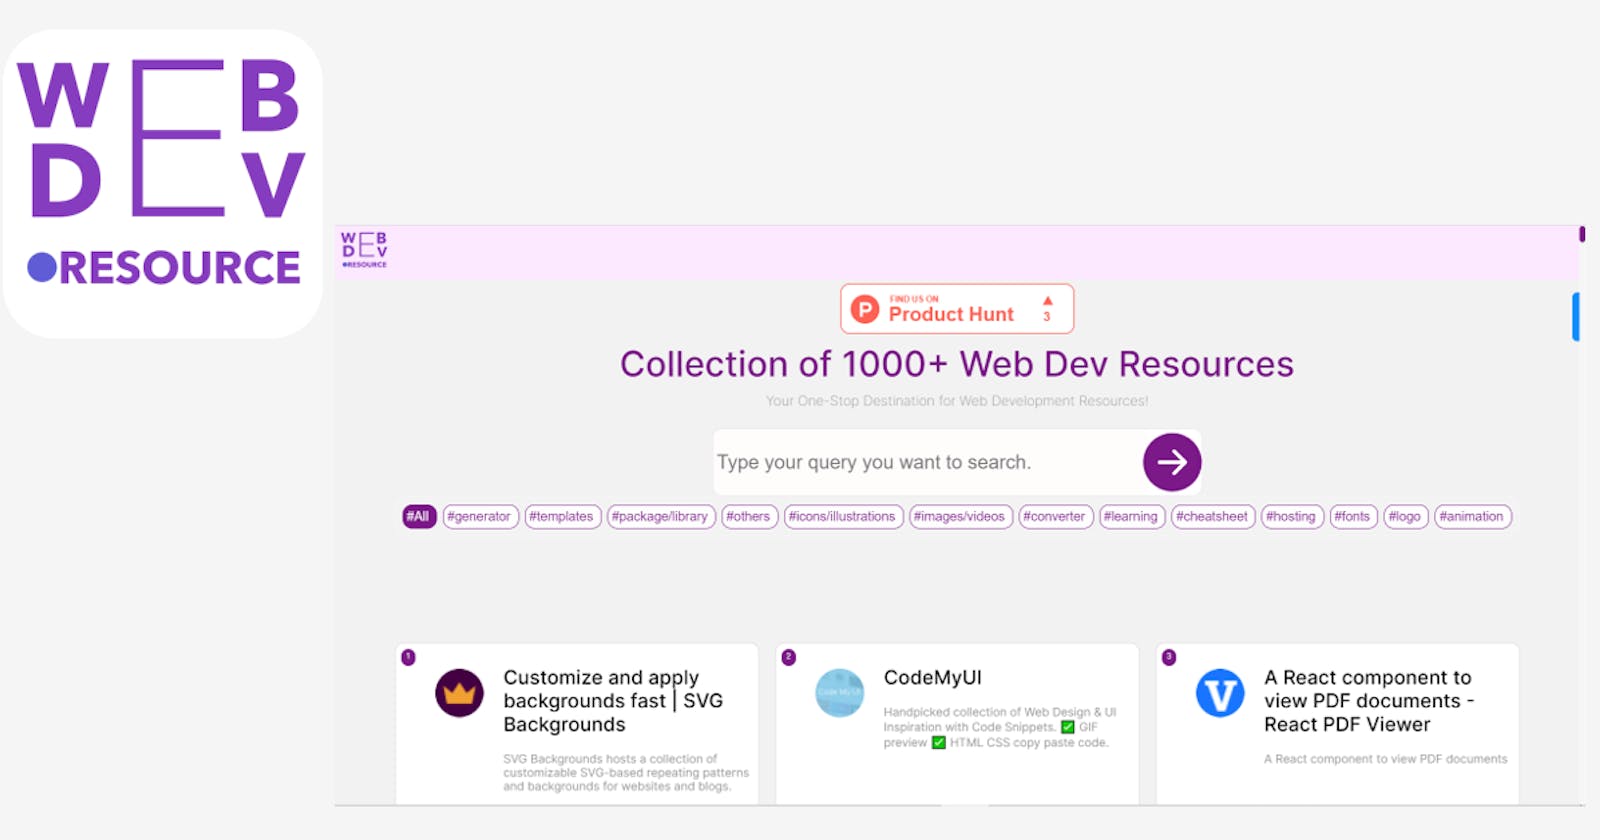 WEB DEV RESOURCE: Your Ultimate Hub for 1000+ Web Development Tools